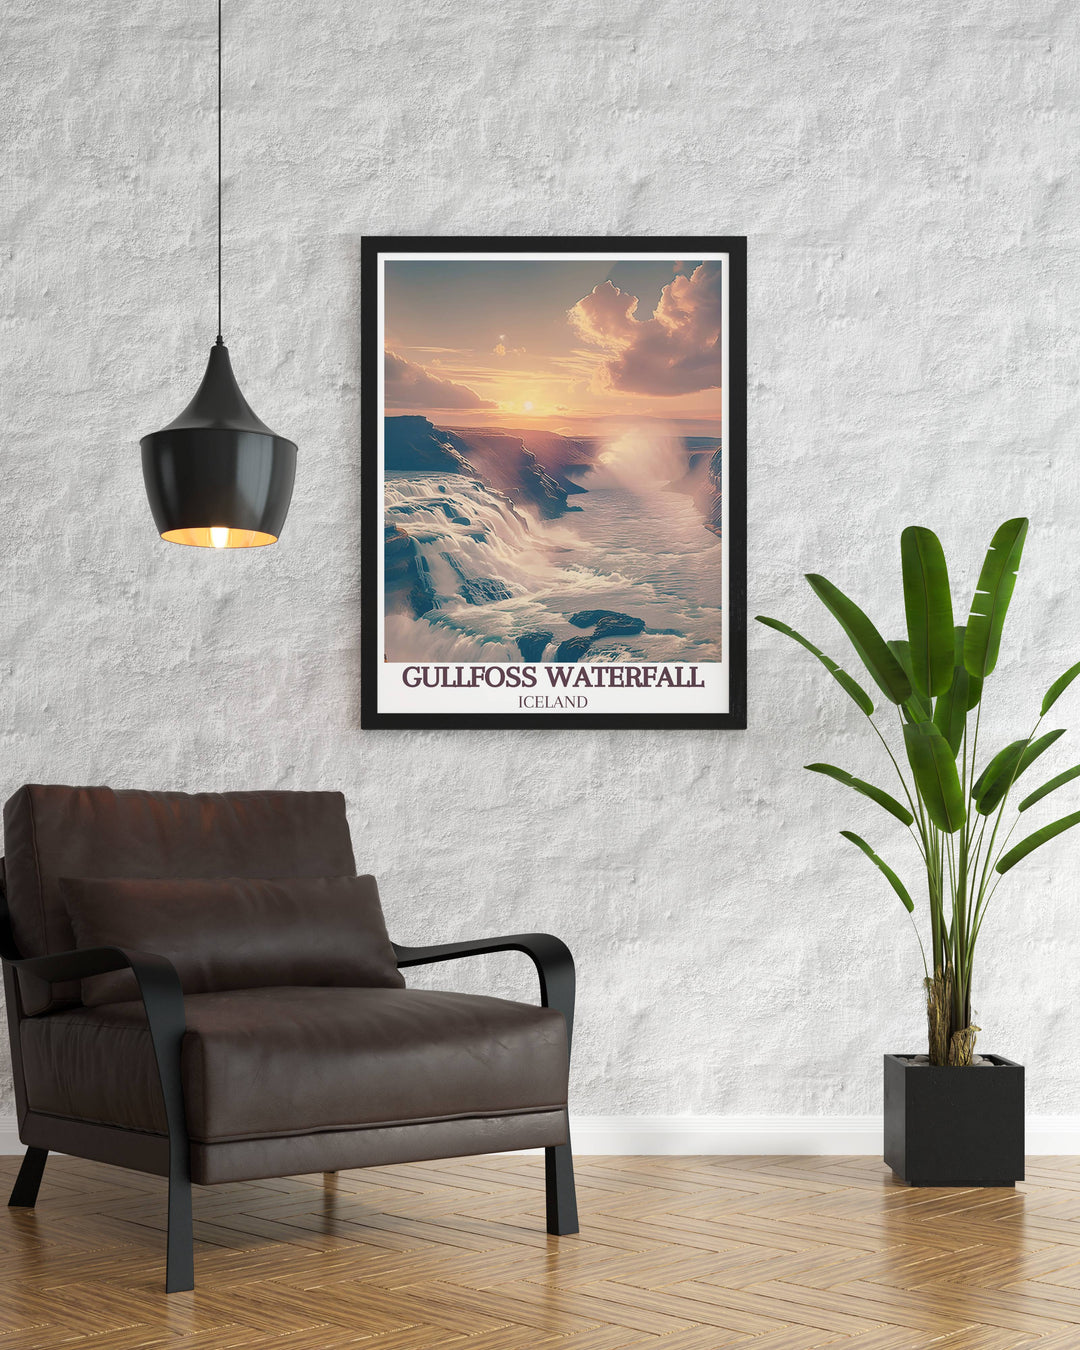 Panoramic view of Hvita River Canyon under a clear blue sky, offering a peaceful and serene setting in a modern wall decor piece